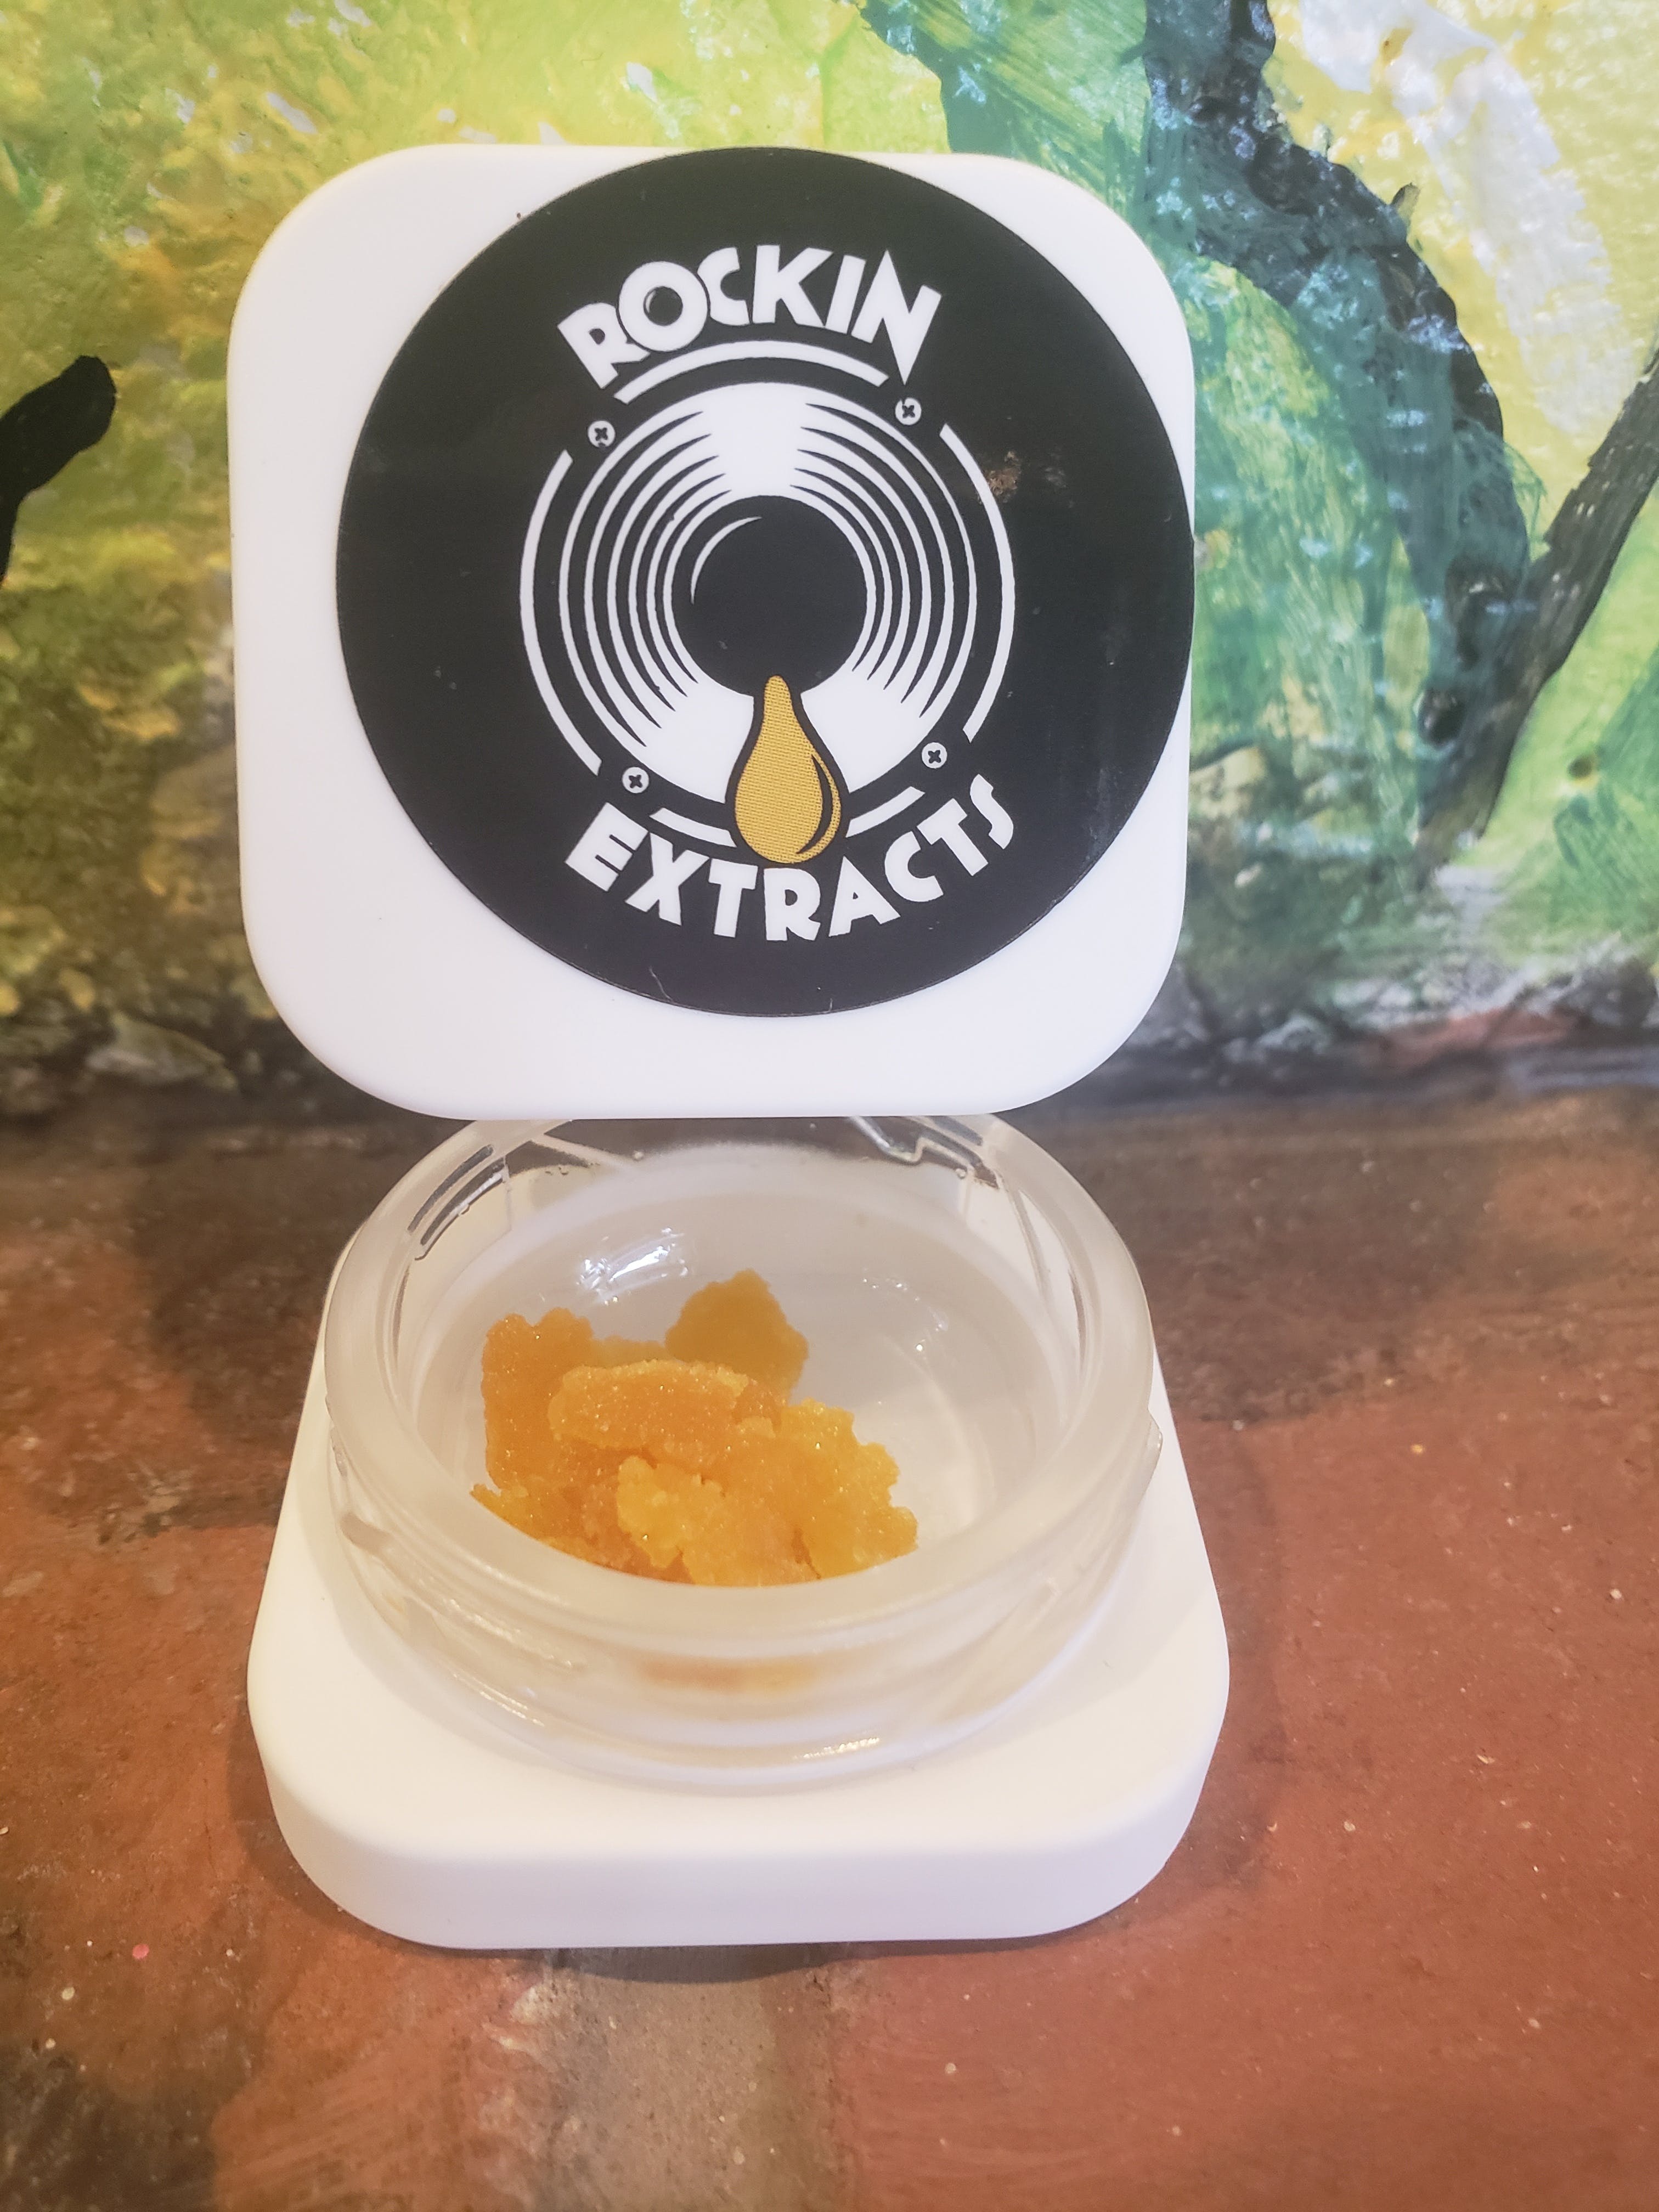 Rockin' Extracts